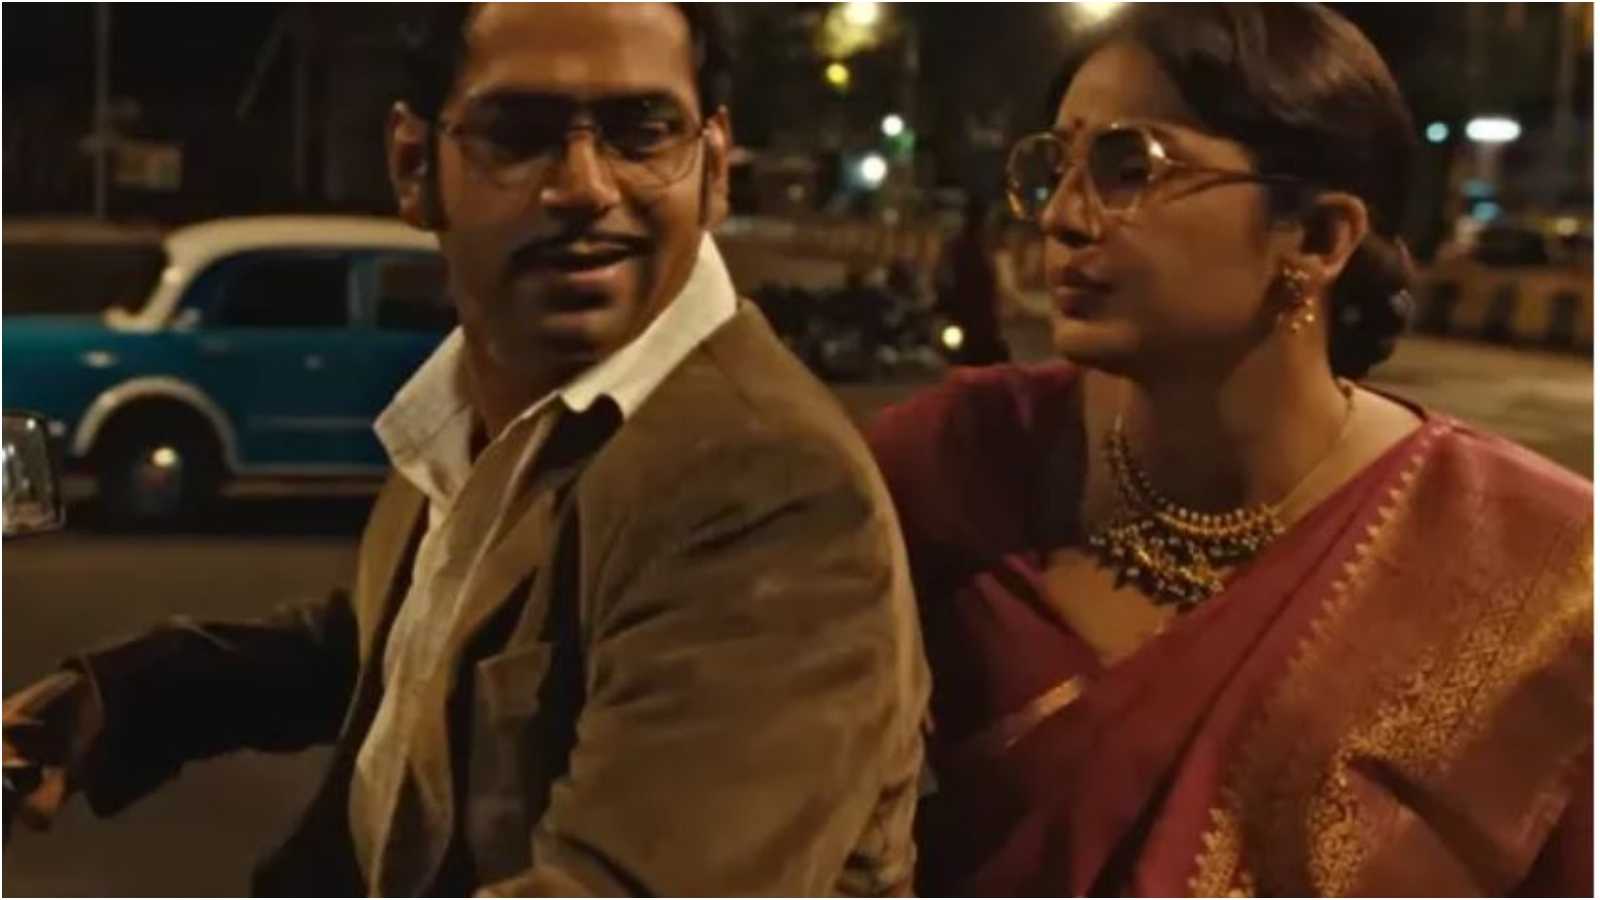 Tarla movie review: Huma Qureshi’s portrayal of India's kitchen queen falls flat but Sharib Hashmi stands out